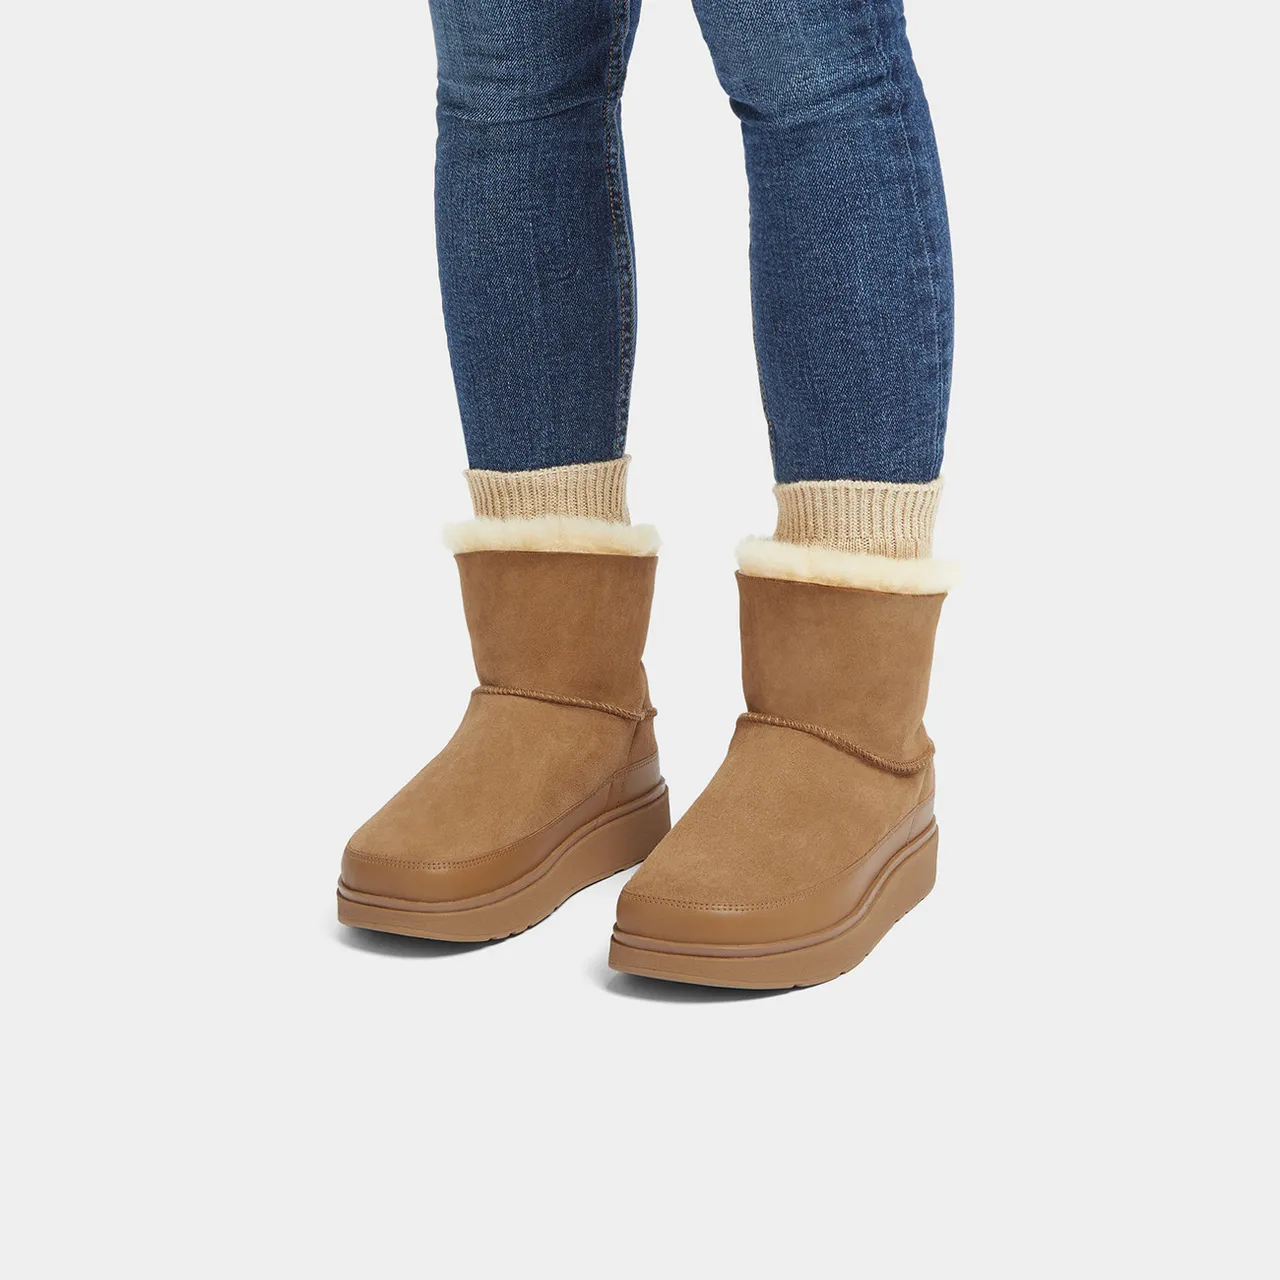 FitFlop Gen-ff mini double-faced shearling boots